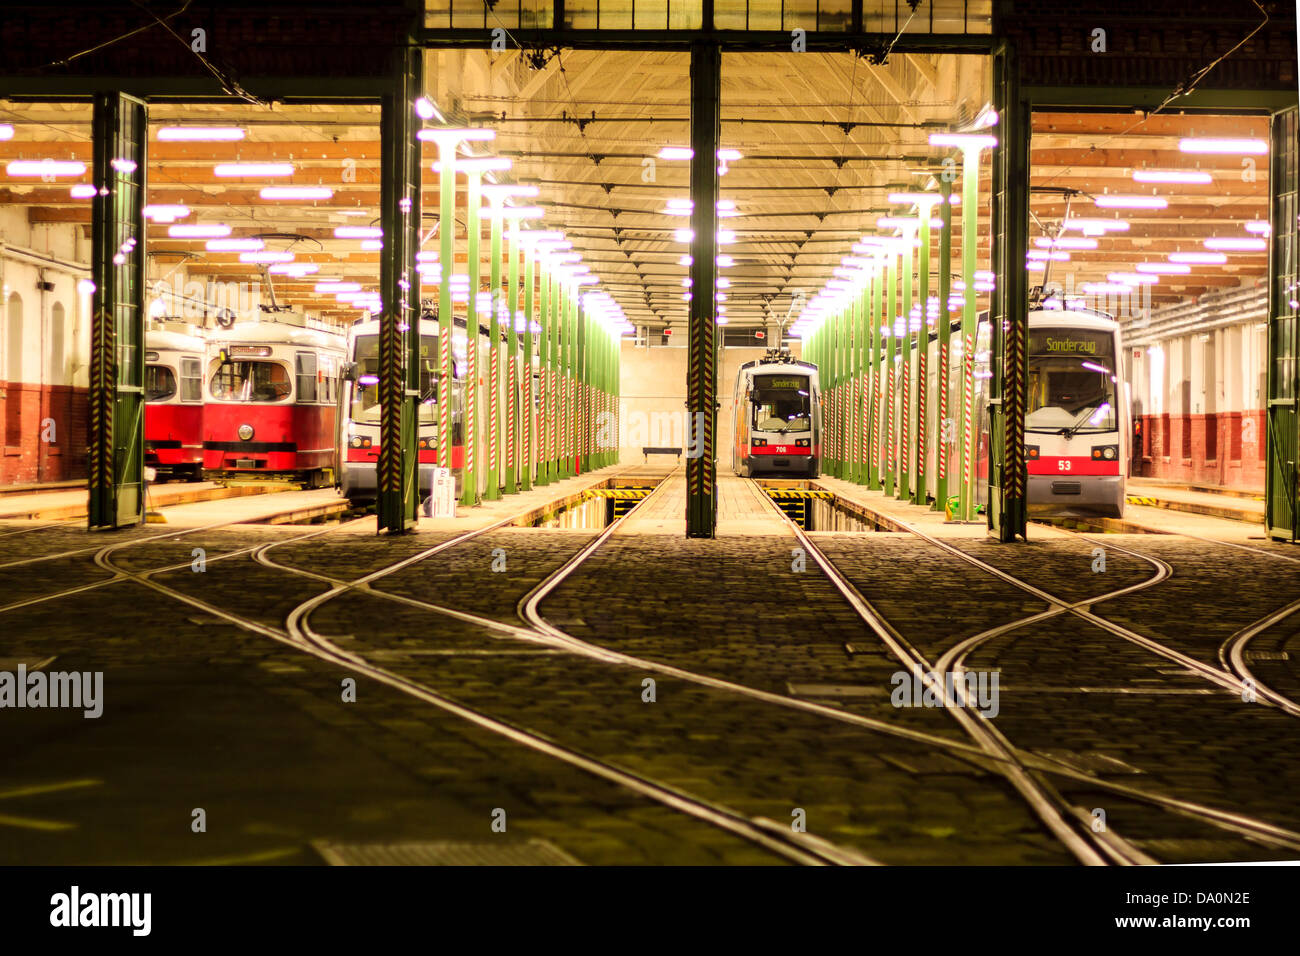 Tram shed by night in Vienna, Austria Stock Photo